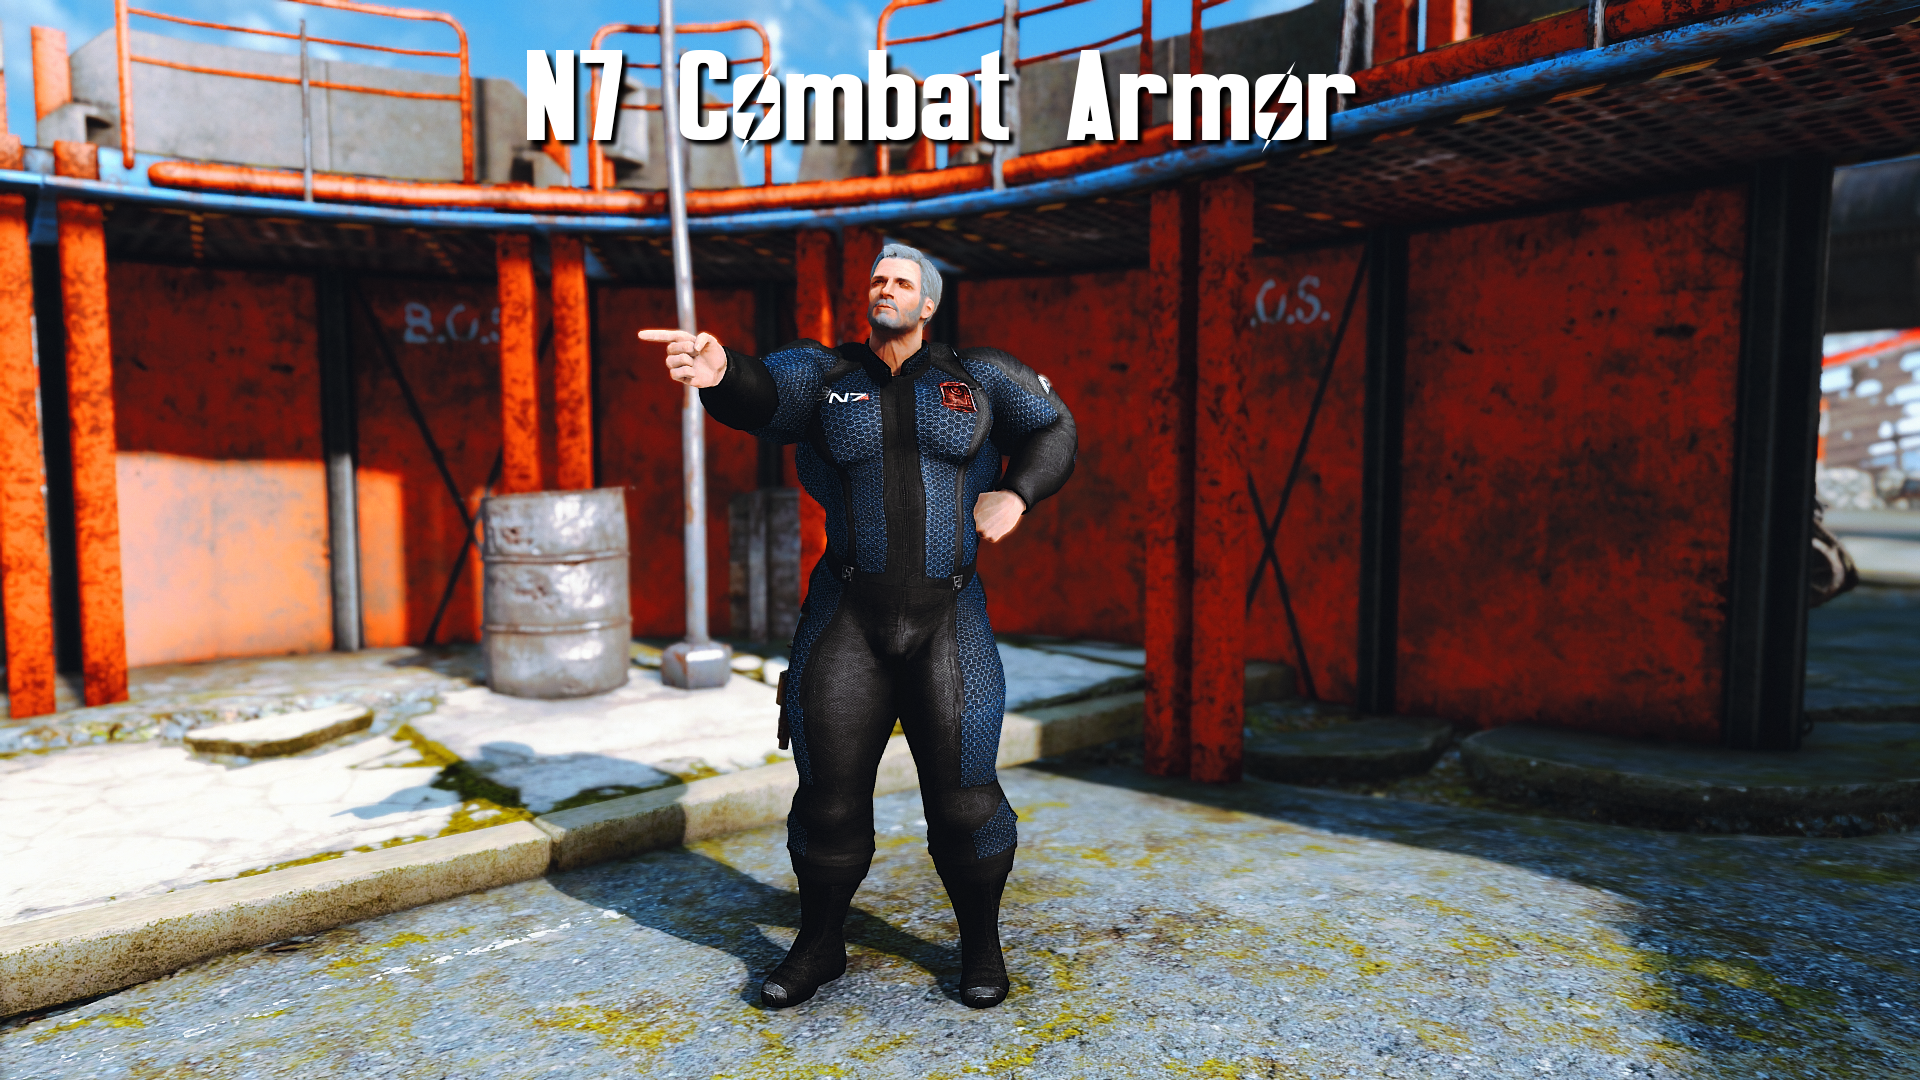 N7 Combat Armor for Atomic Muscle